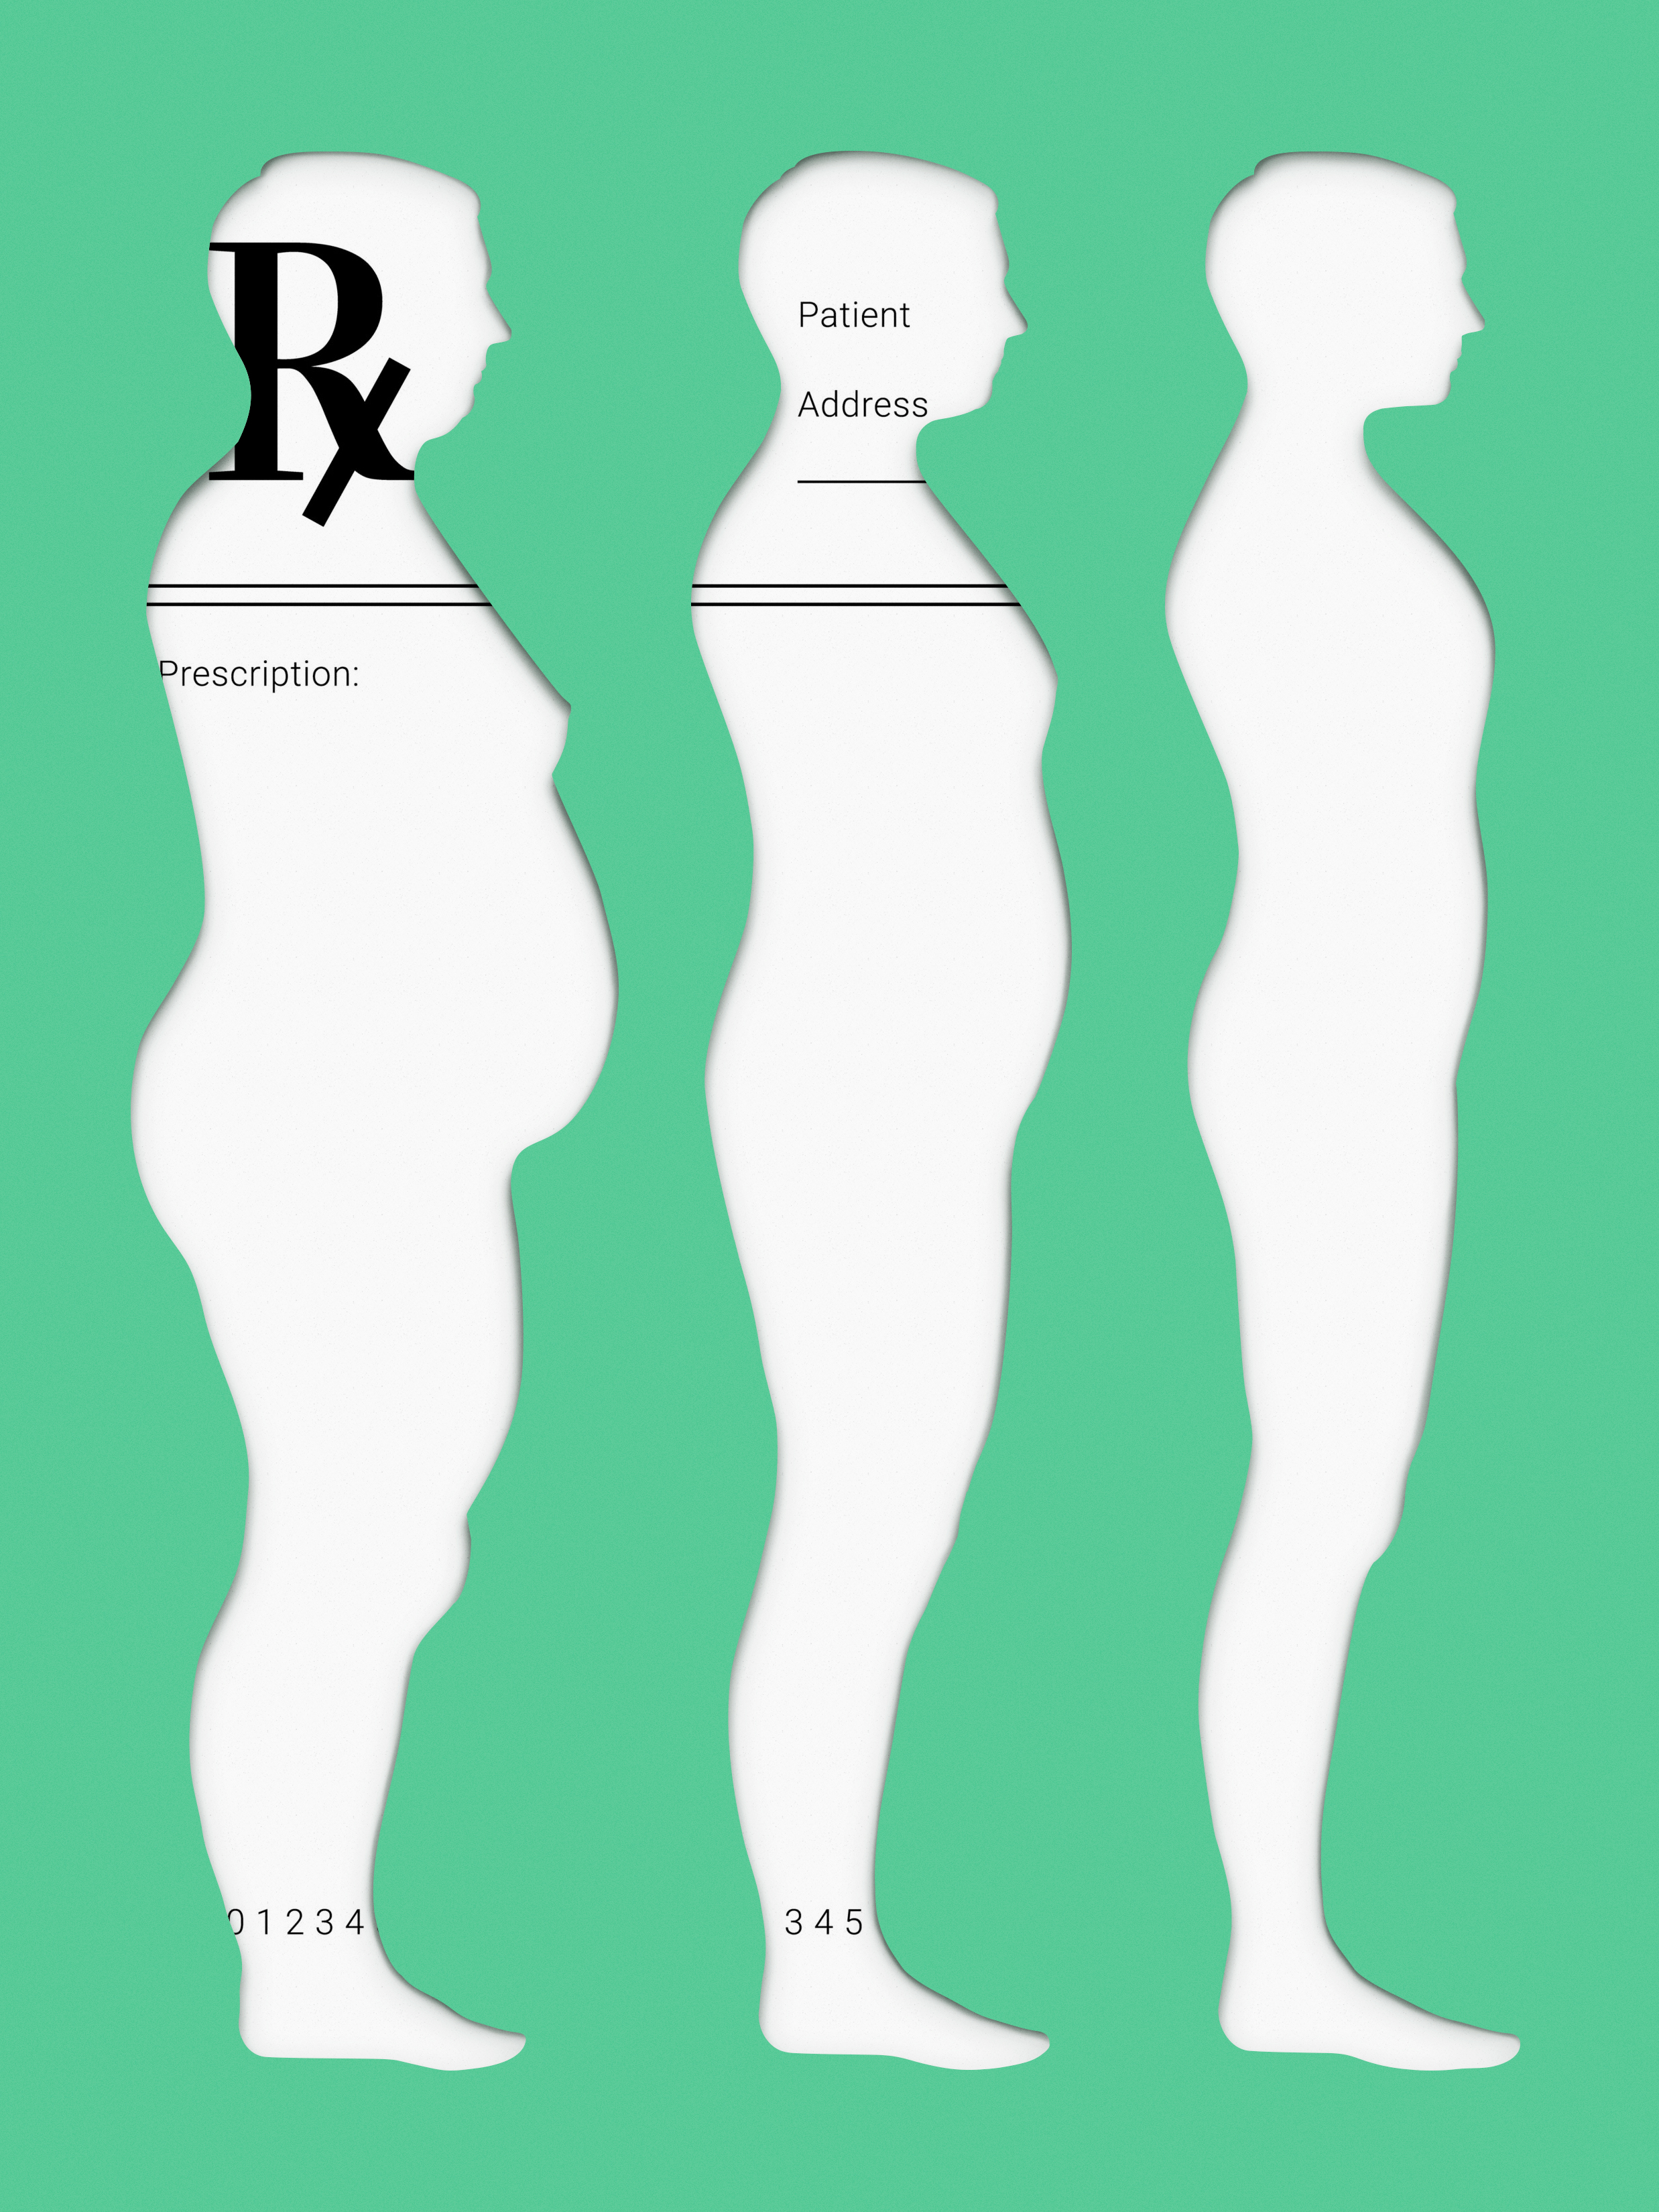 An illustration by Mariaelena Caputi showing the silhouettes of a man who becomes thin from obese. While a doctor's prescription appears within the silhouettes of the obese man and the overweight man, symbolizing the state of illness in which the subject pours, it is not visible within the silhouette of the thin man.